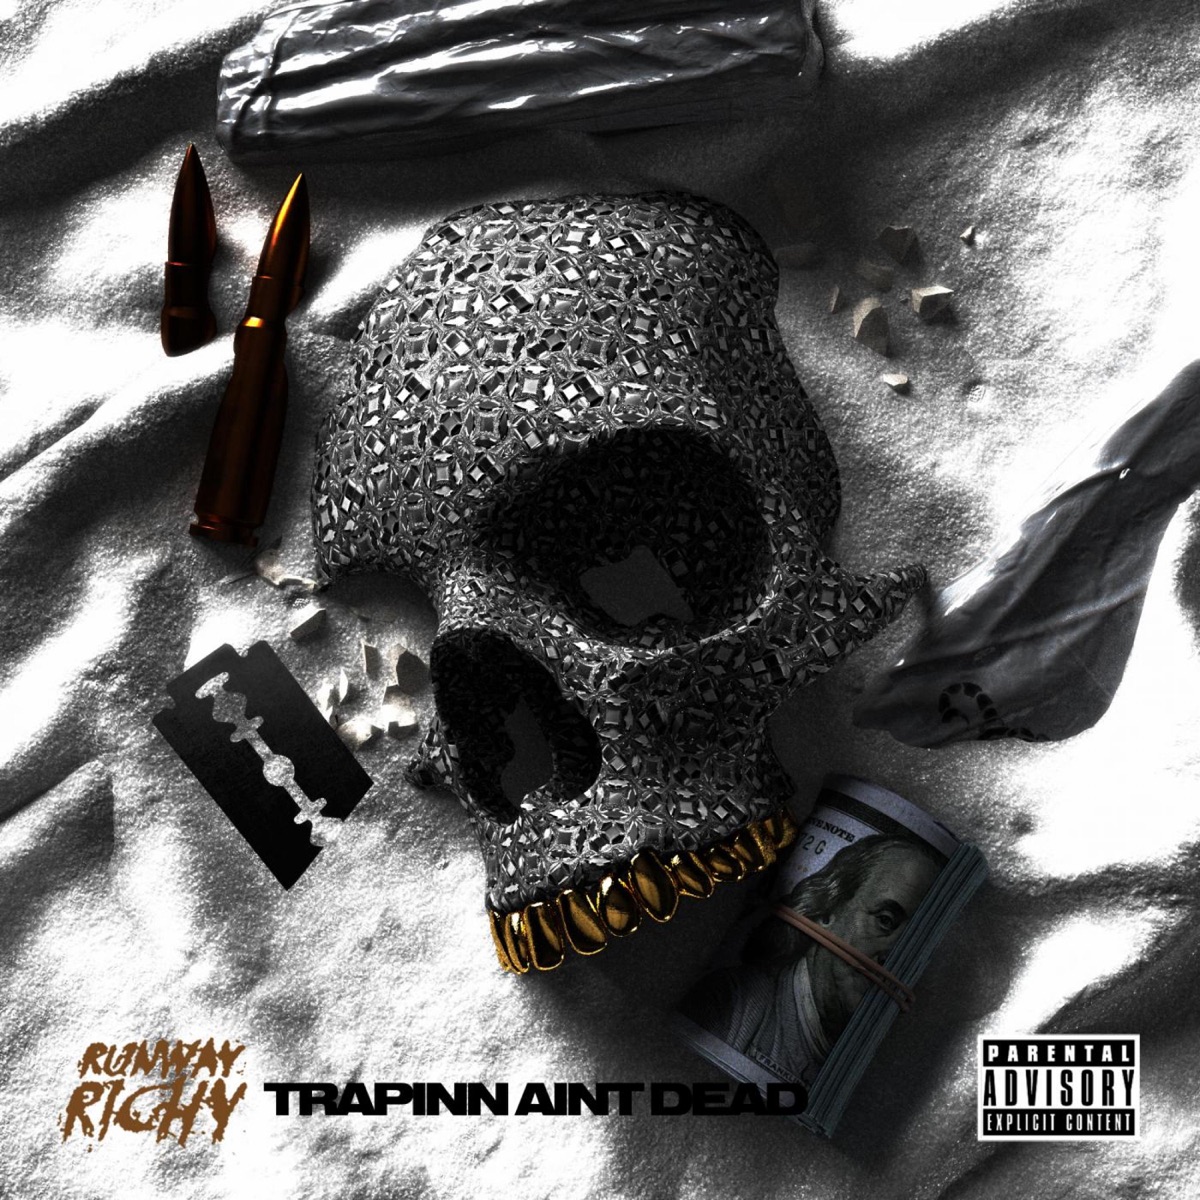 Art for Trappin Aint Dead by Runway Richy